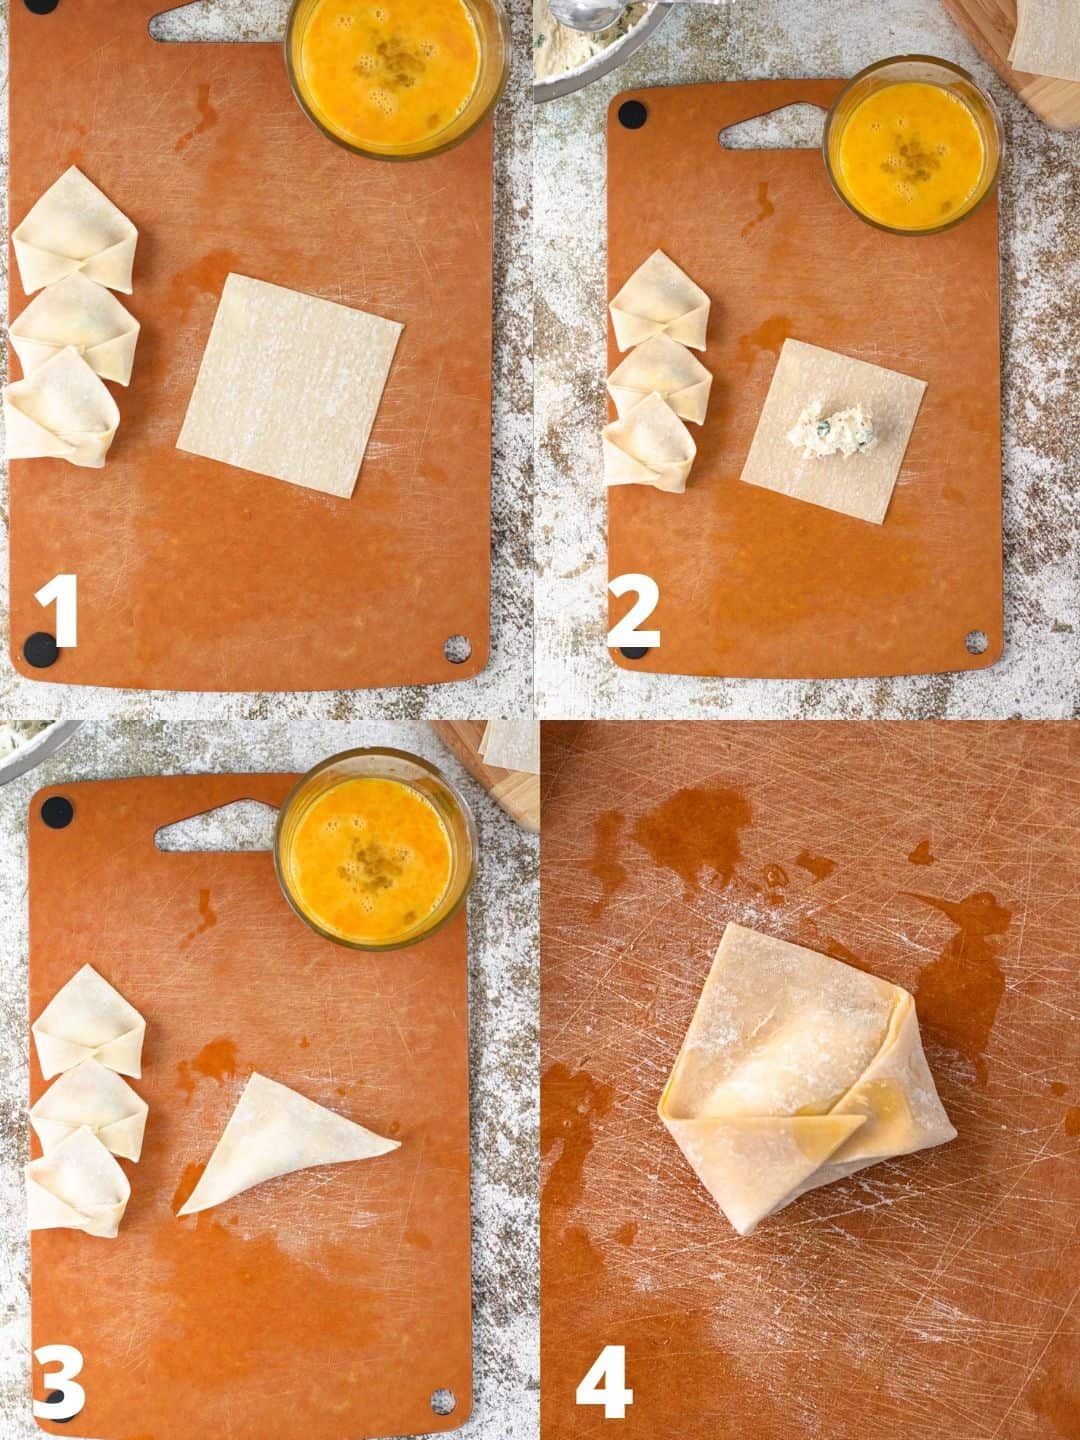 4 Steps to creating rangoons with an egg wash and inserting filling into the wonton wrapper, folding it up. 